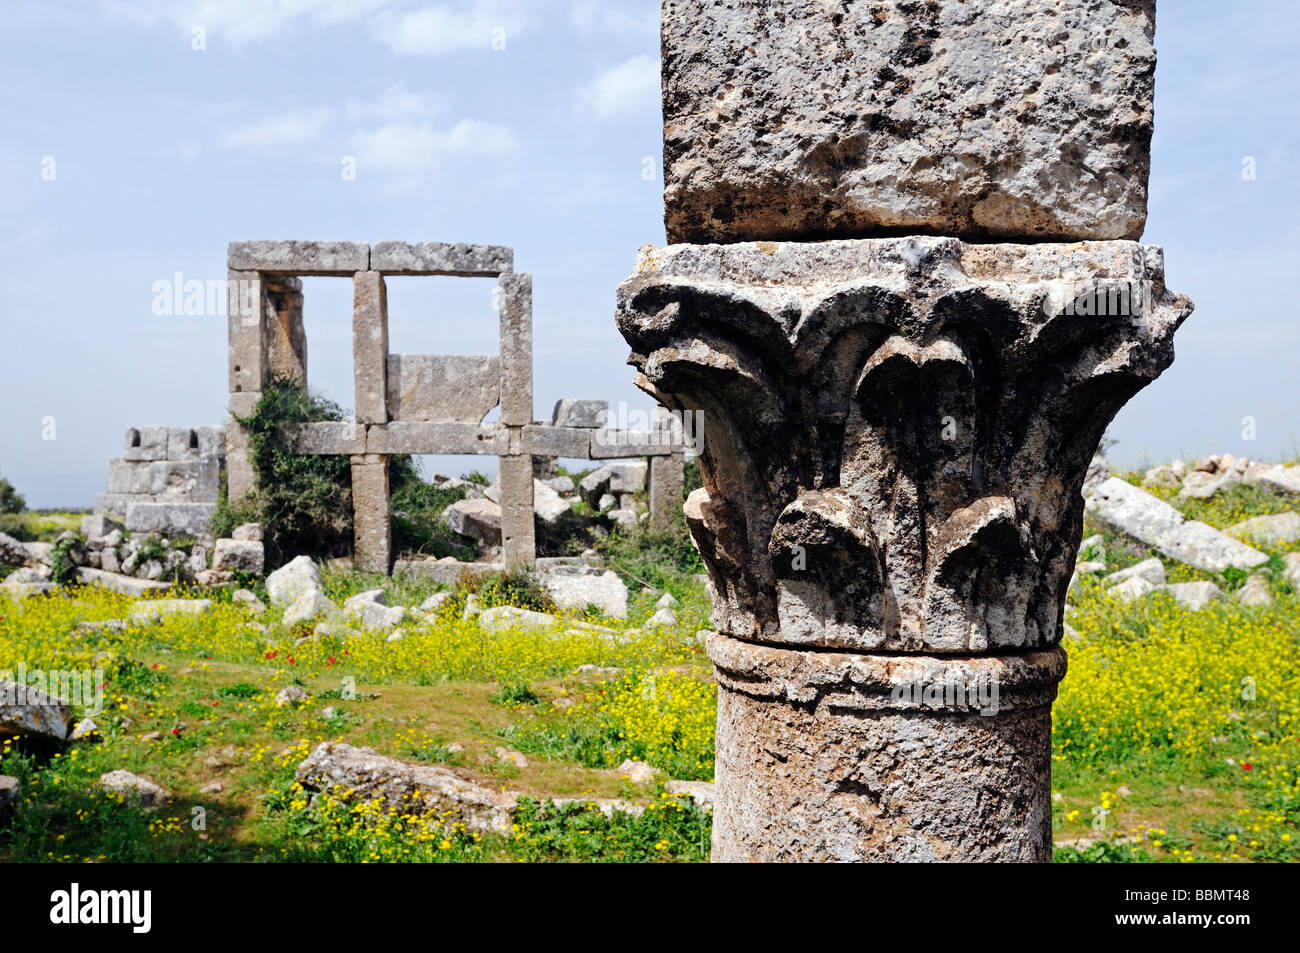 Ruins from the Byzantine era in Daire Simeon, Dead Cities near Aleppo, Syria, Middle East, Asia Stock Photo